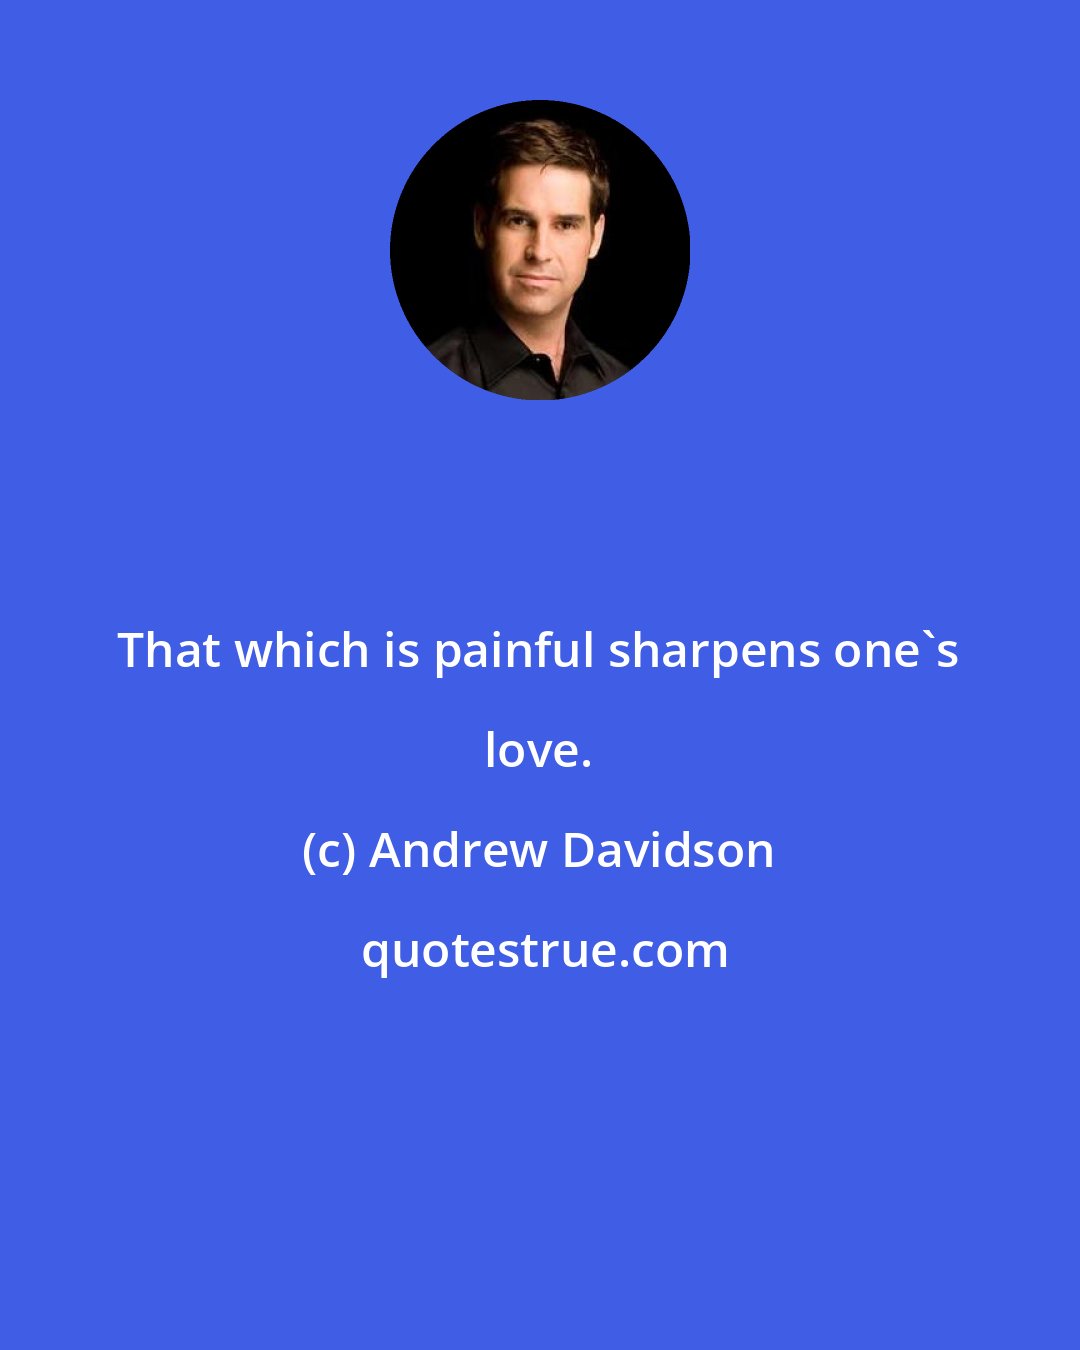 Andrew Davidson: That which is painful sharpens one's love.